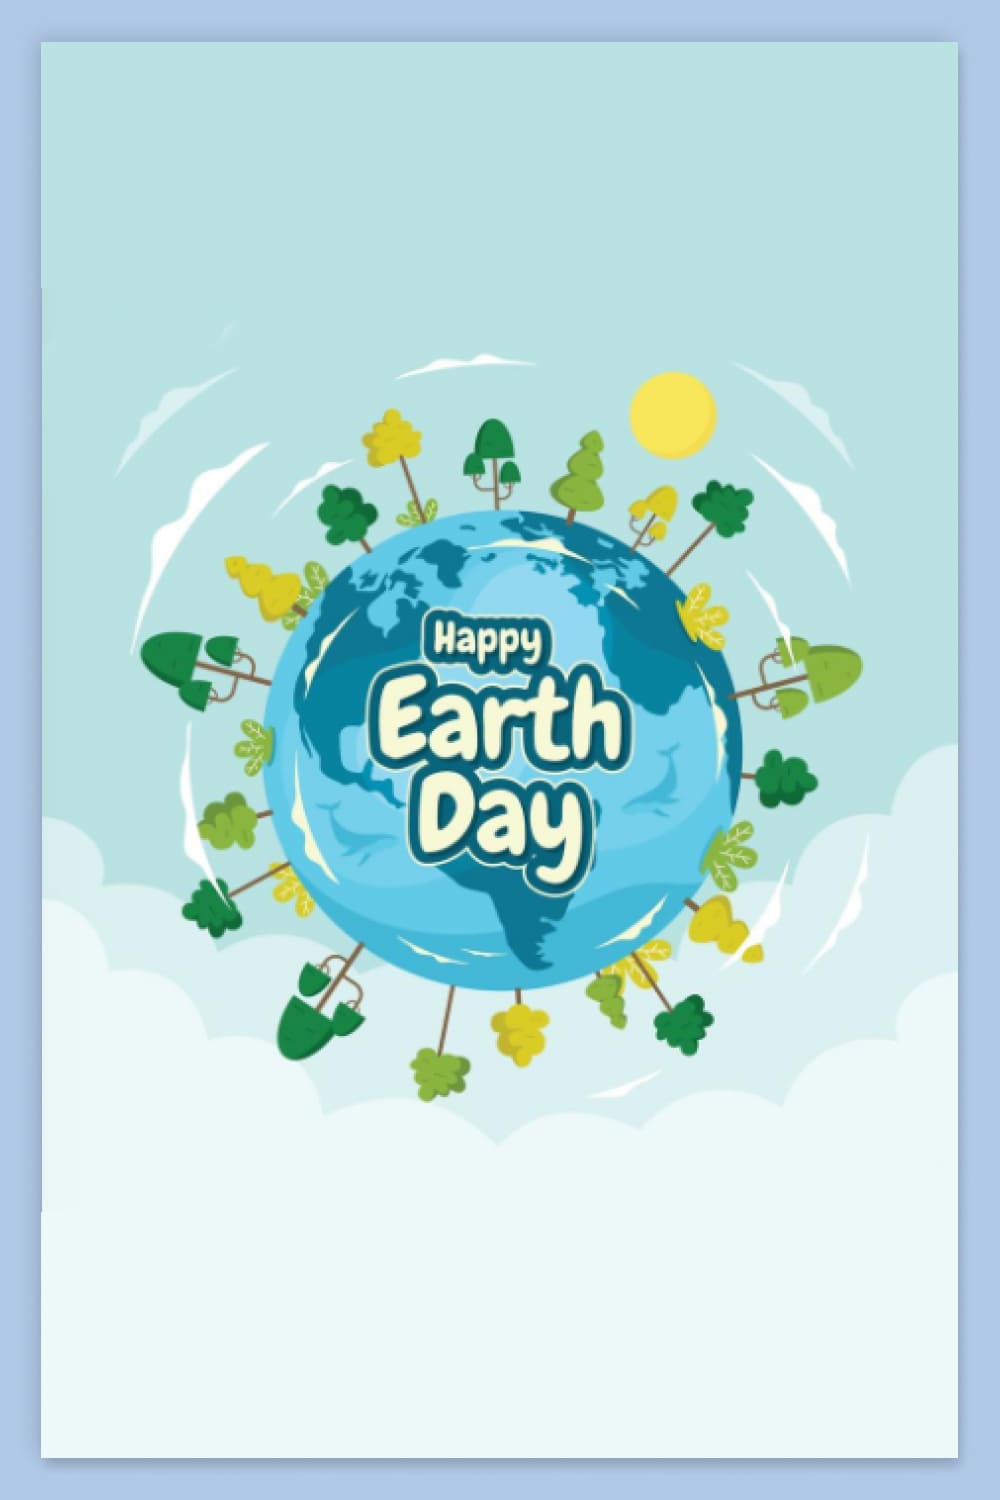 Drawing of the planet Earth with trees on it and the inscription Happy Earth Day.